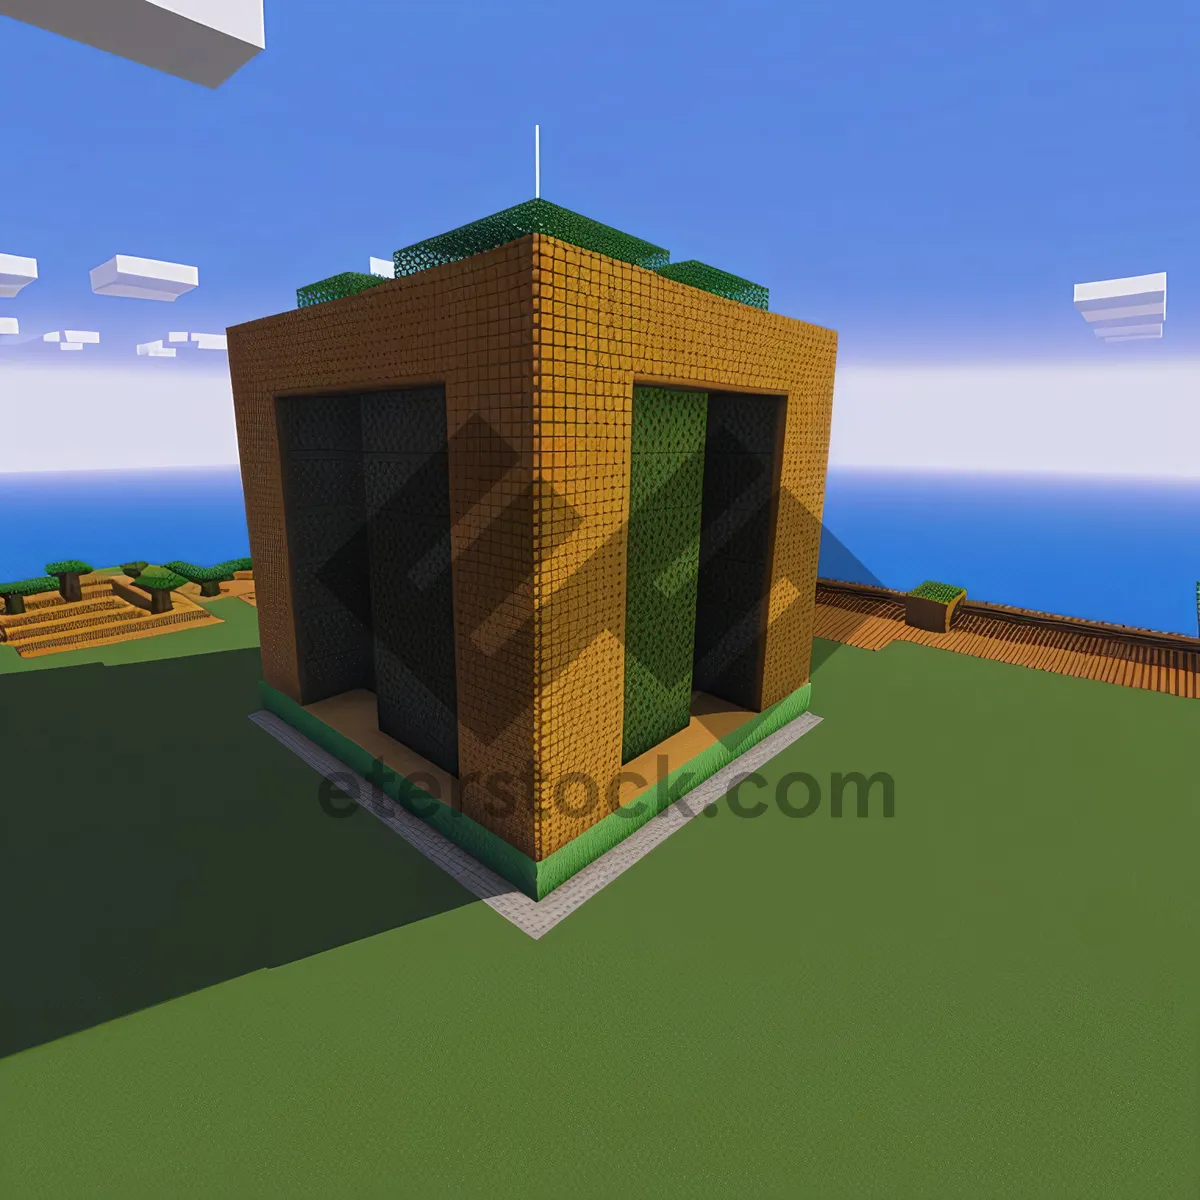 Picture of Modern residential estate with 3D architecture and chimney.